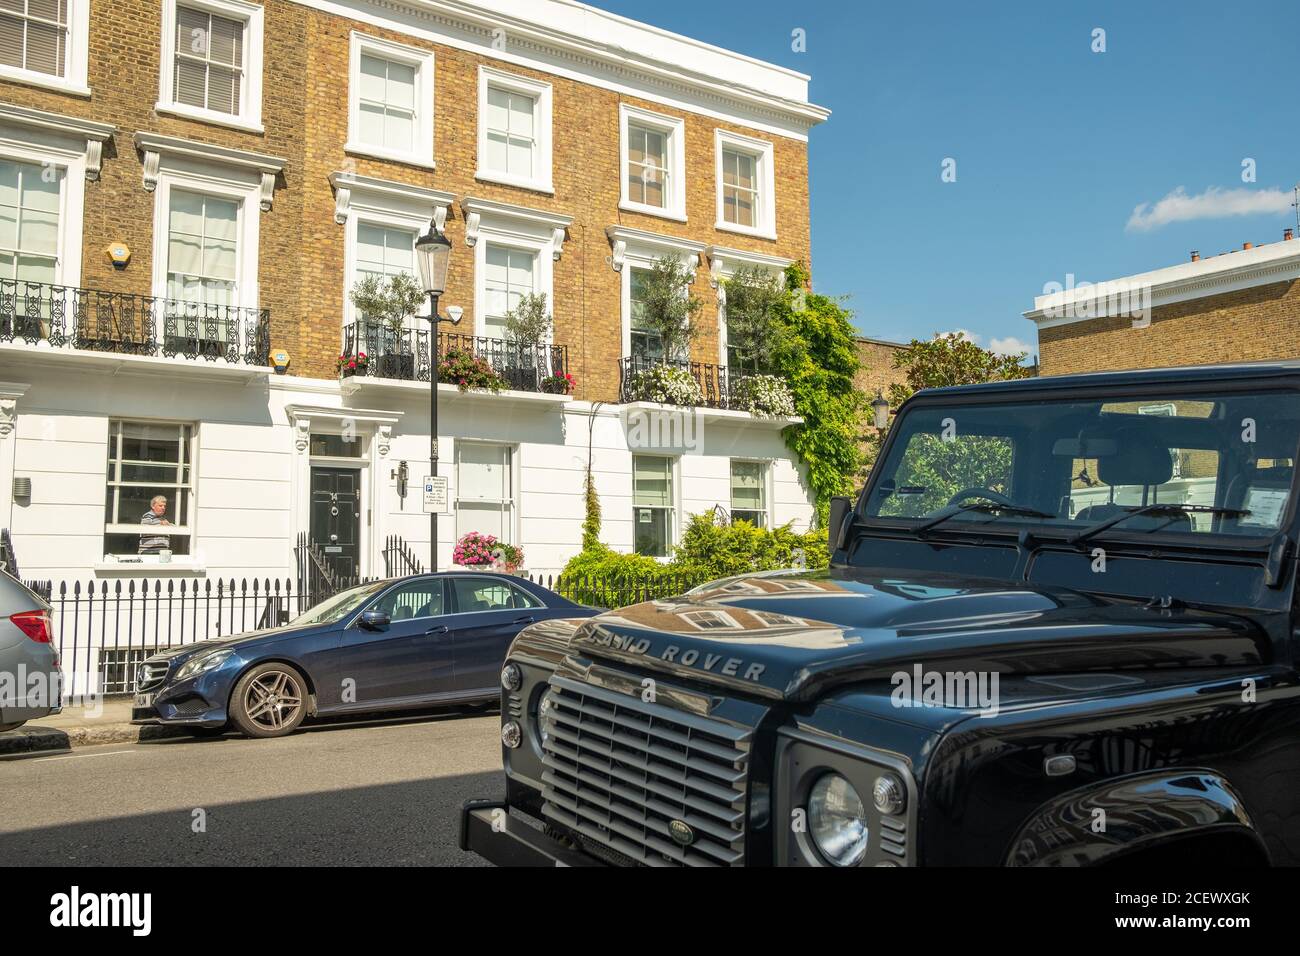 Land Rover Defender parked on typical street of beautiful white stucco terraced townhouses in Chelsea Stock Photo